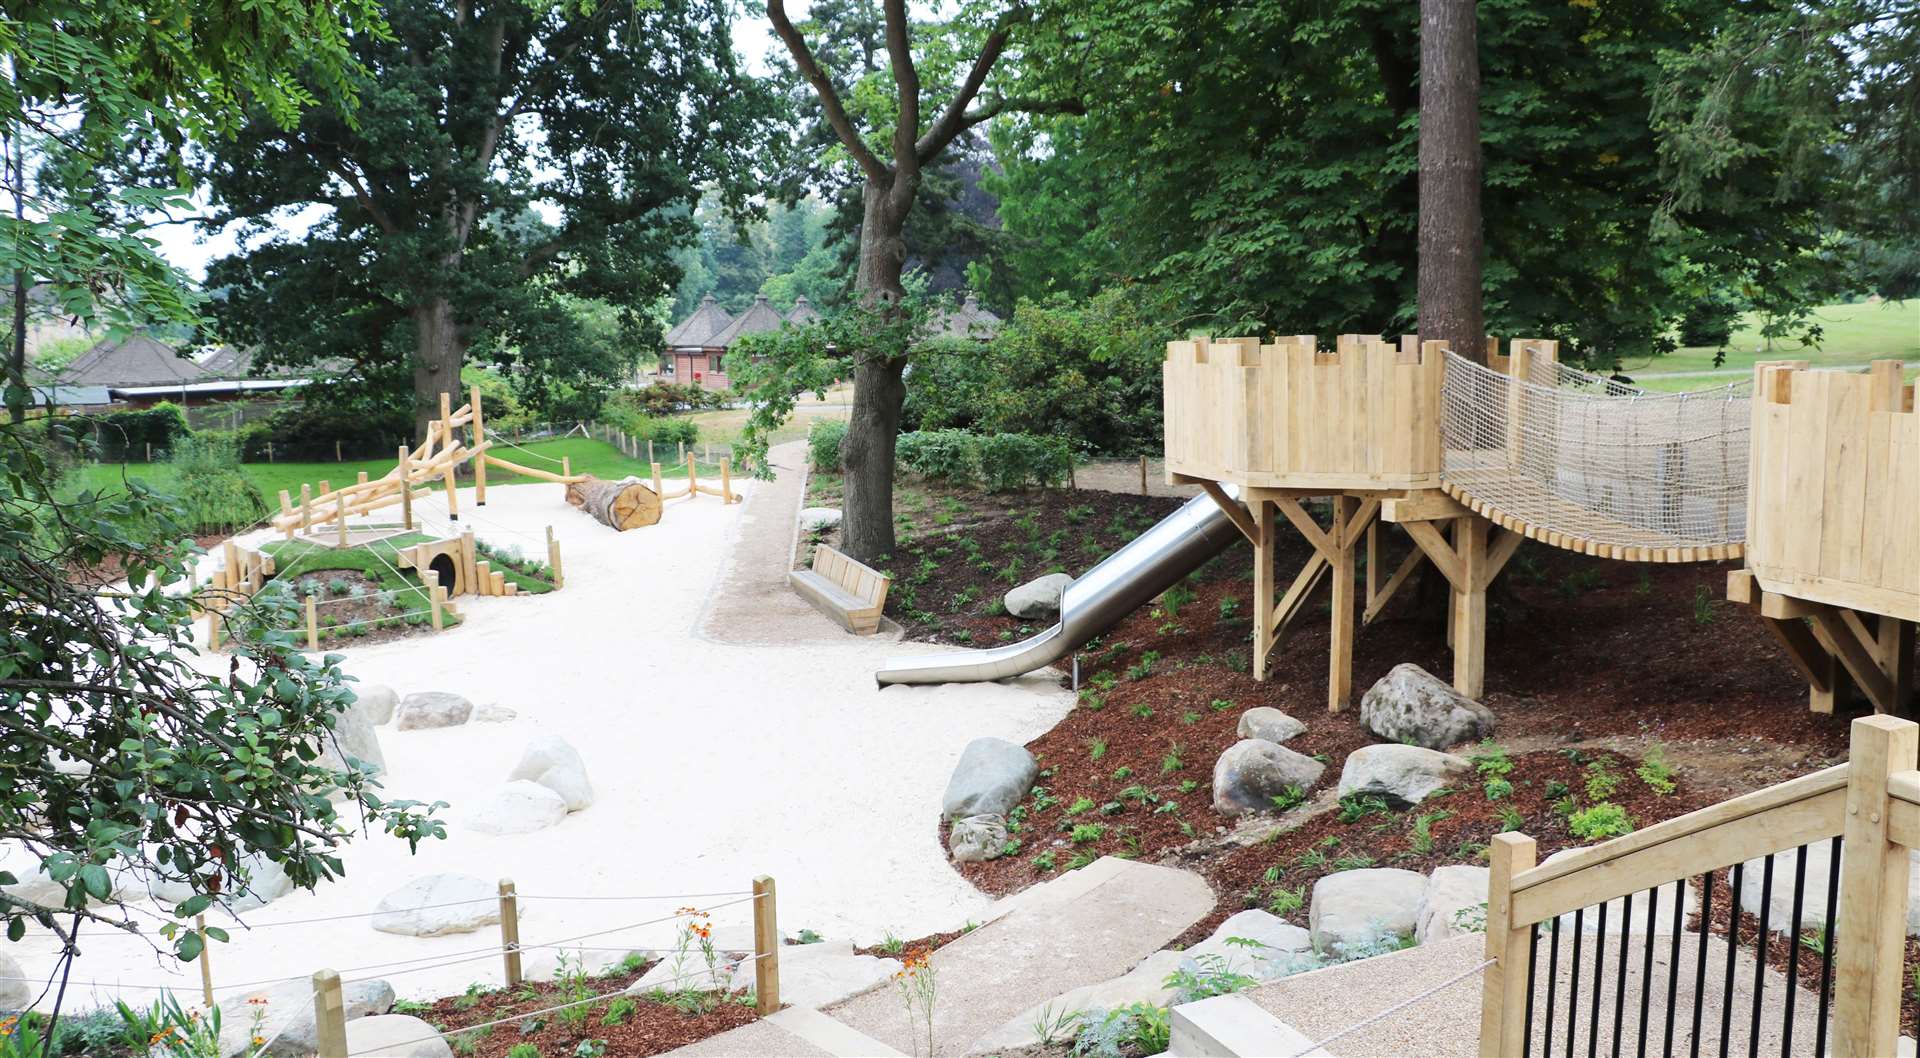 Hever Castle says it will have staff on site when it reopens its play areas at the attraction